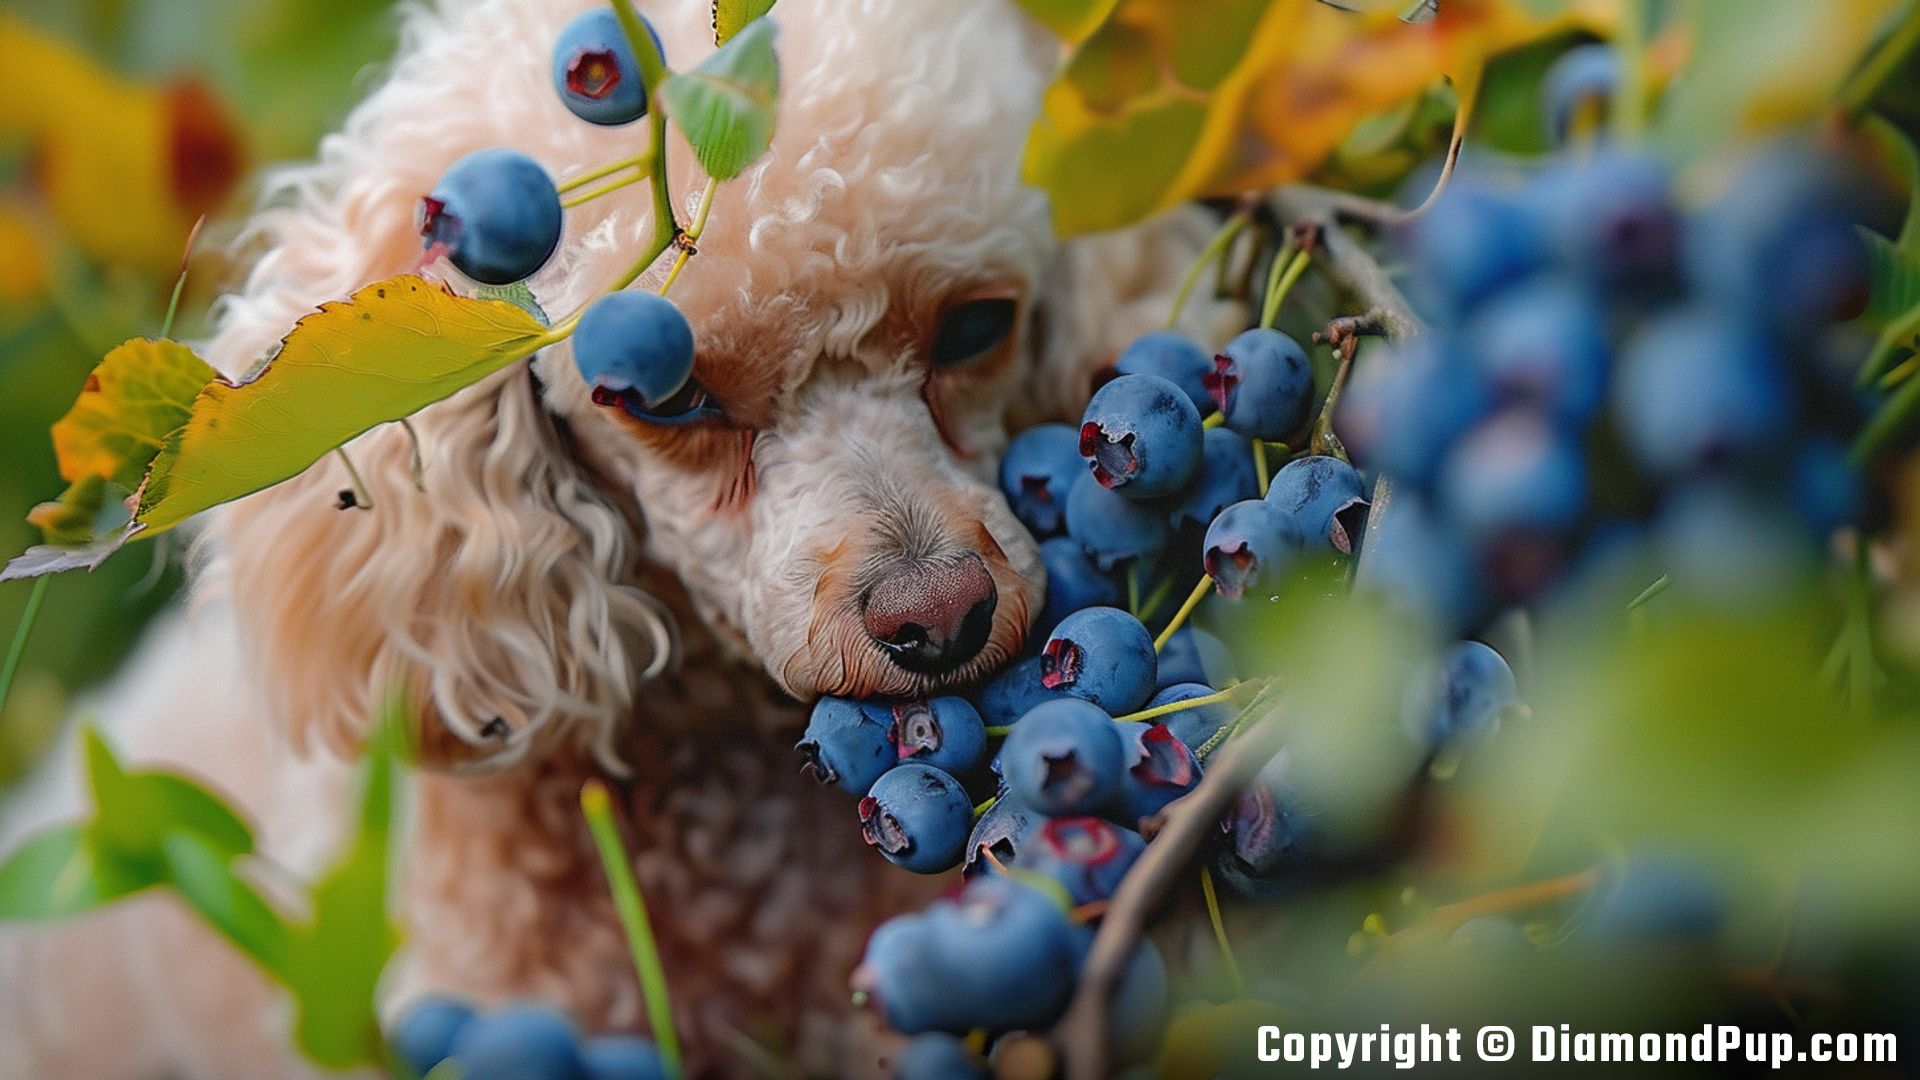 Photo of an Adorable Poodle Snacking on Blueberries